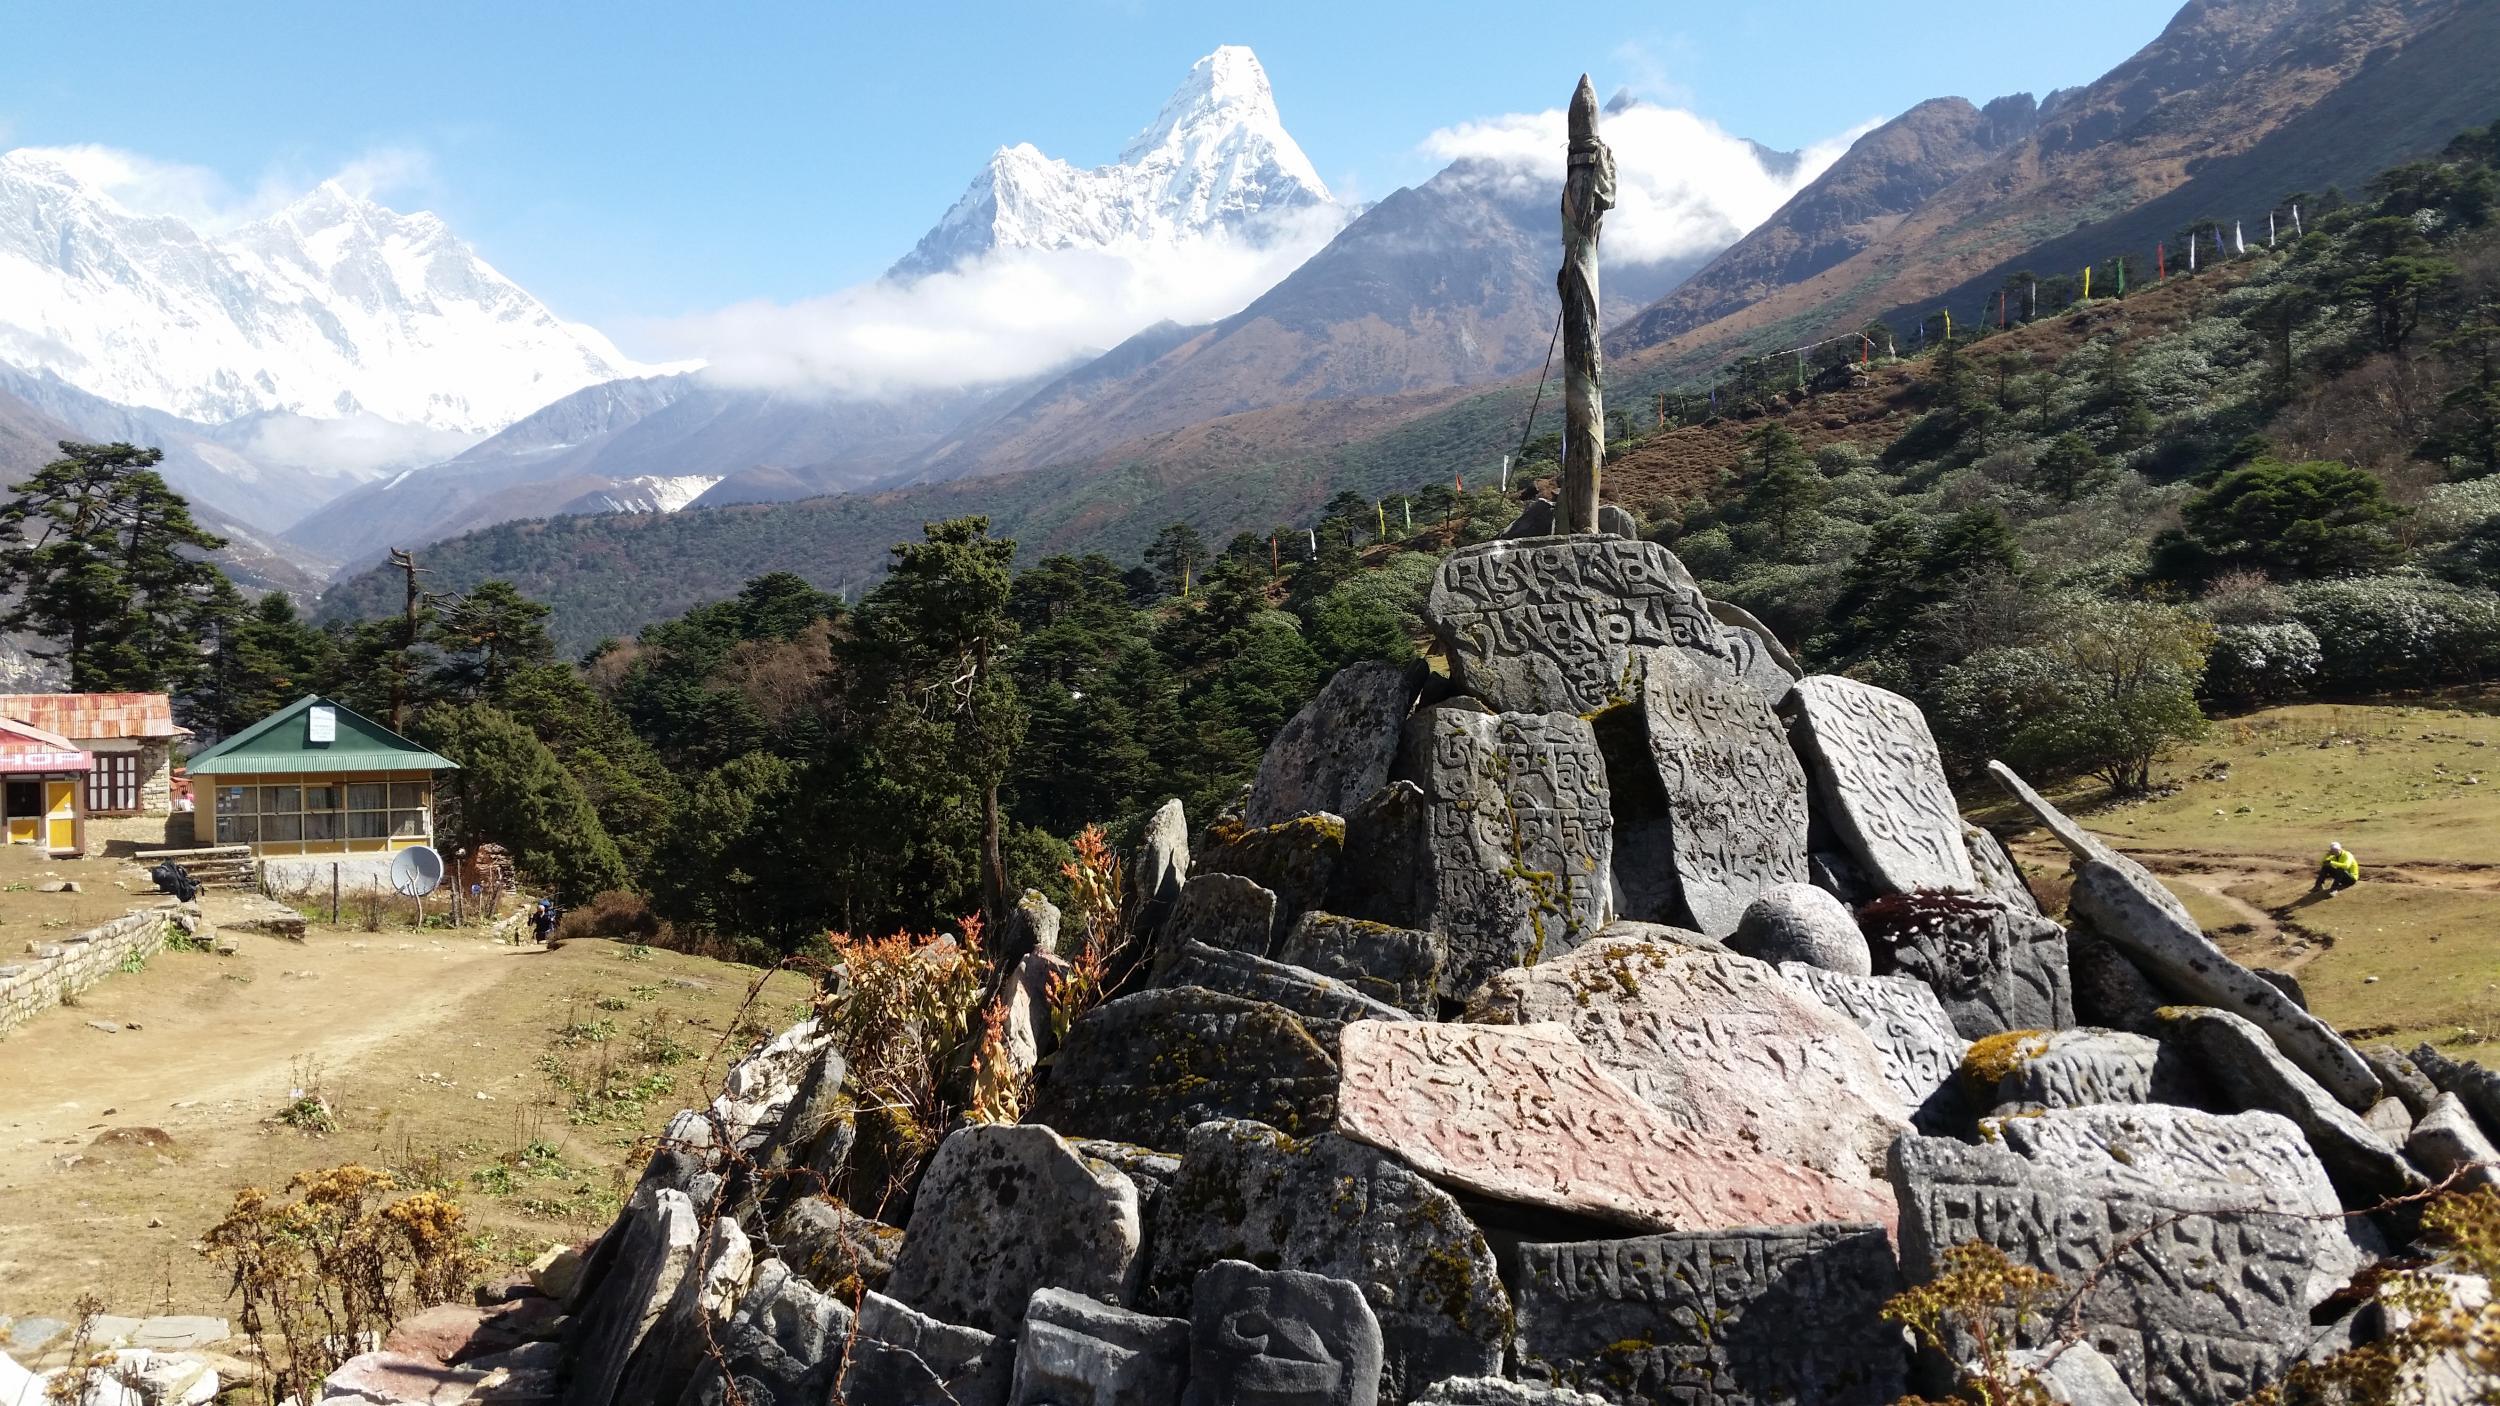 Nelson was evacuated from Tengboche